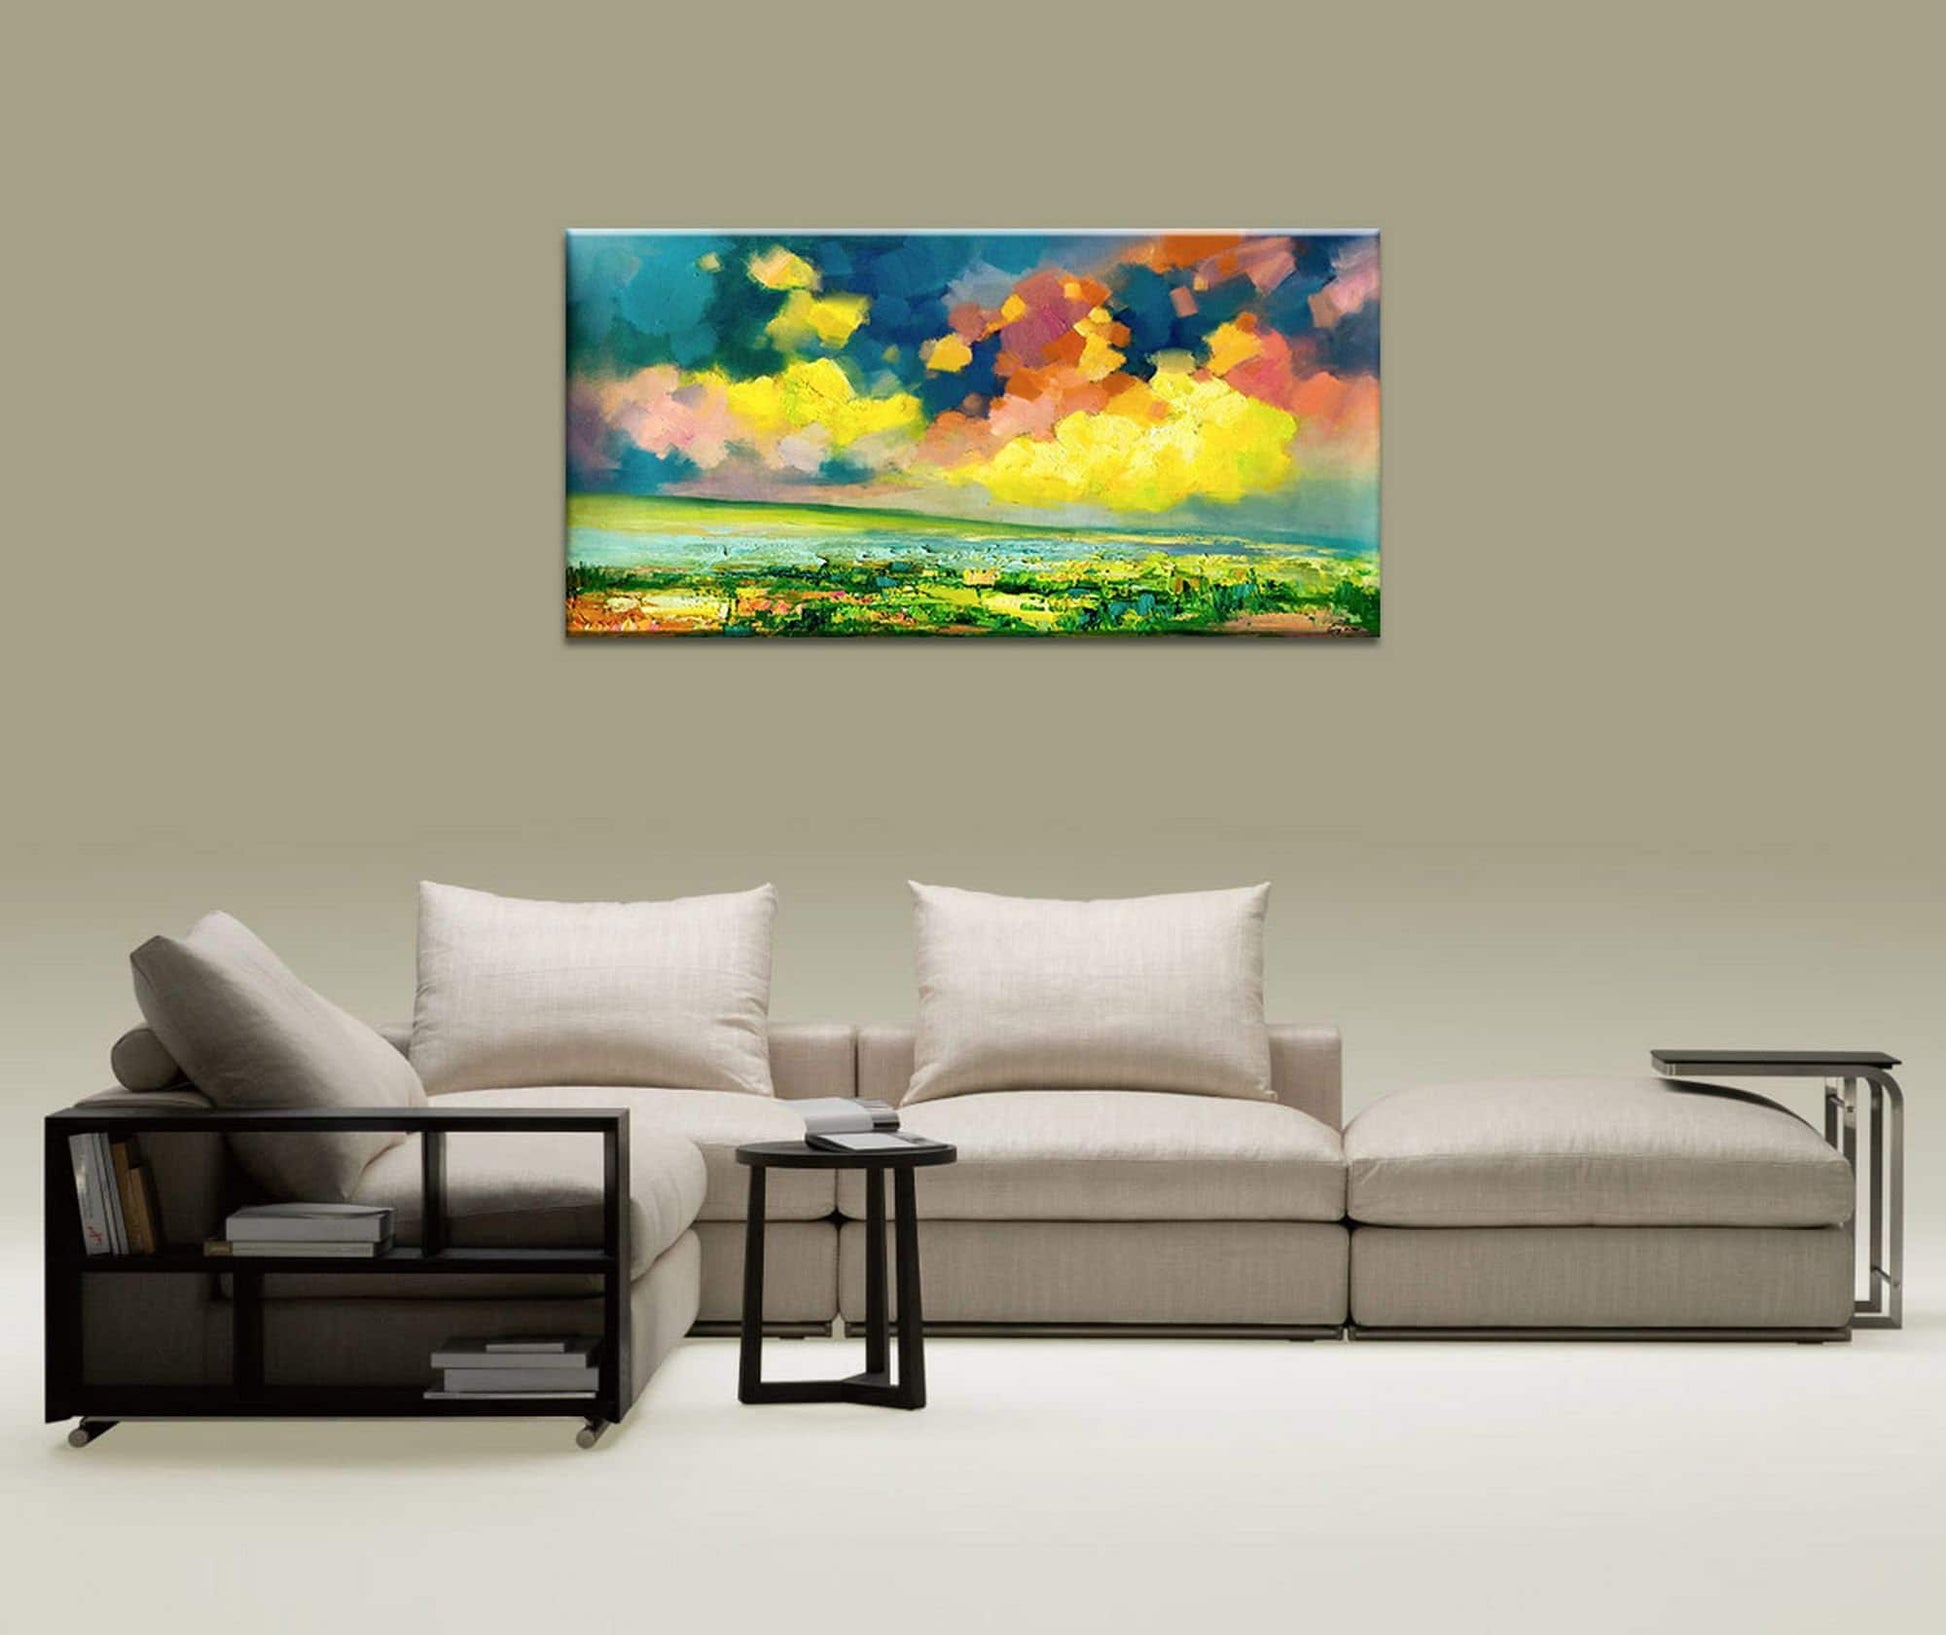 Oil Painting Spring Abstract Landscape, Wall Art, Oil On Canvas Painting, Abstract Landscape, Large Oil Painting Original Canvas